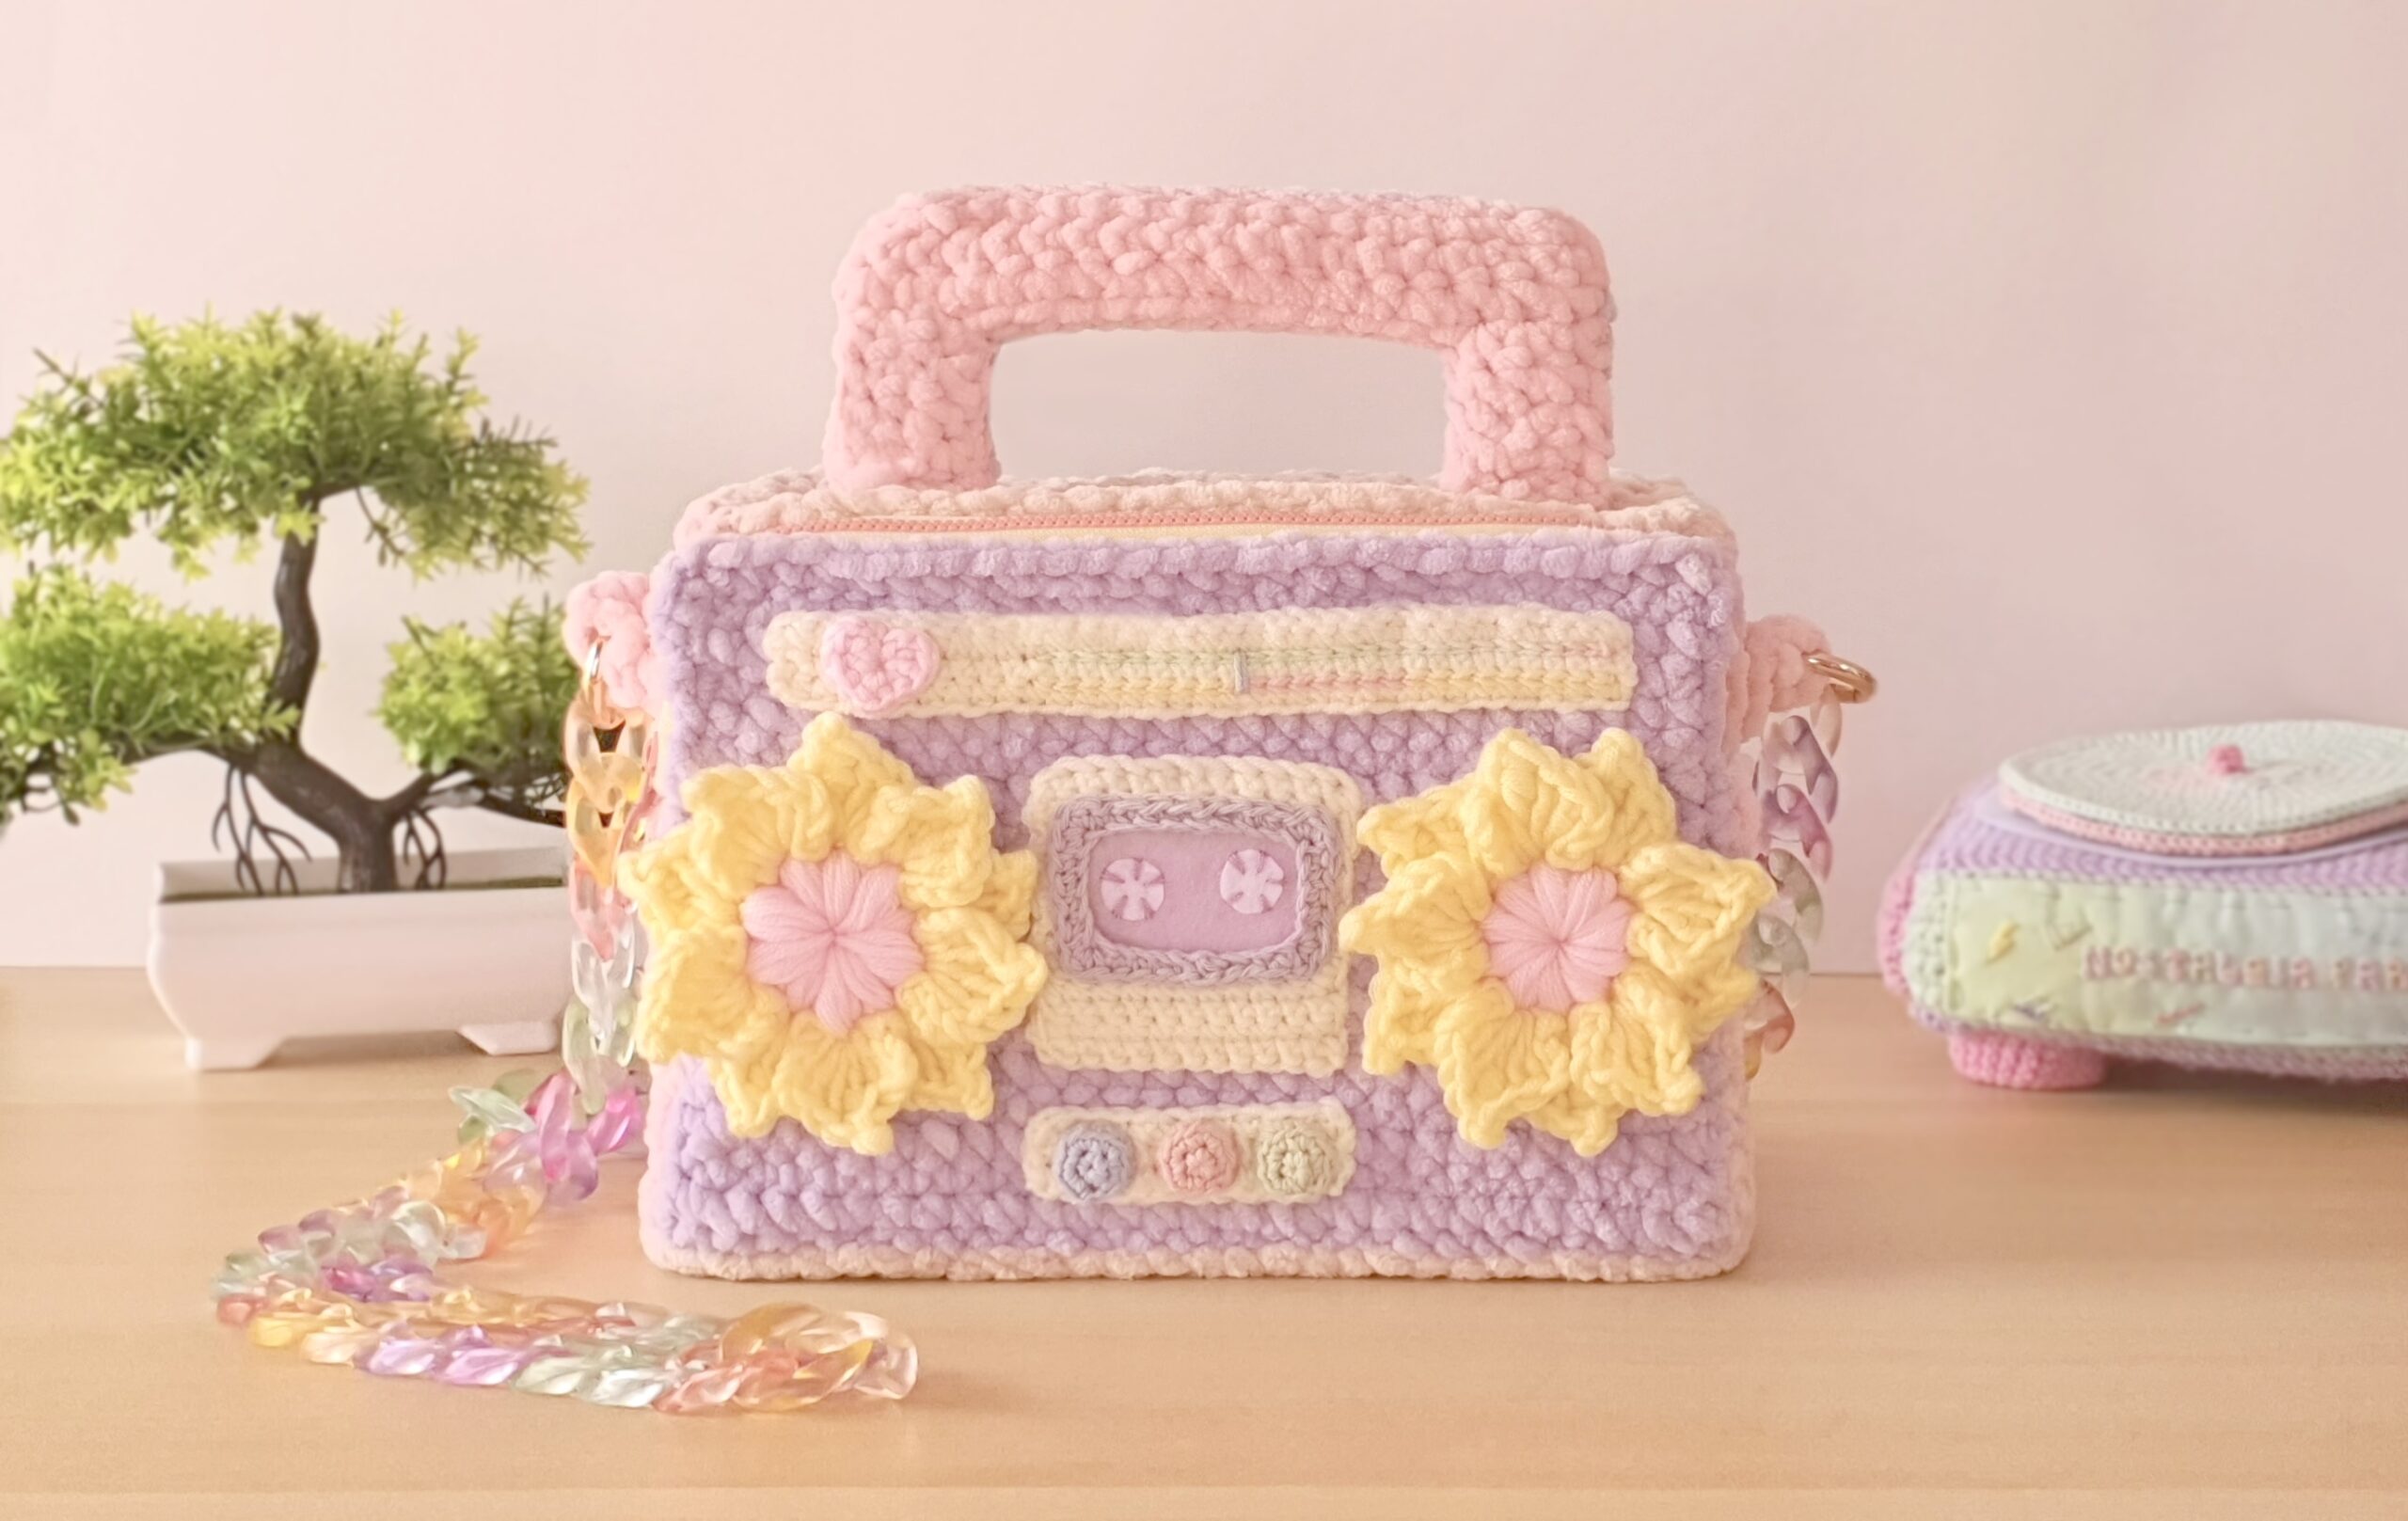 Relive the 90s Era in Style With This Ultimate Crochet Boombox Bag !